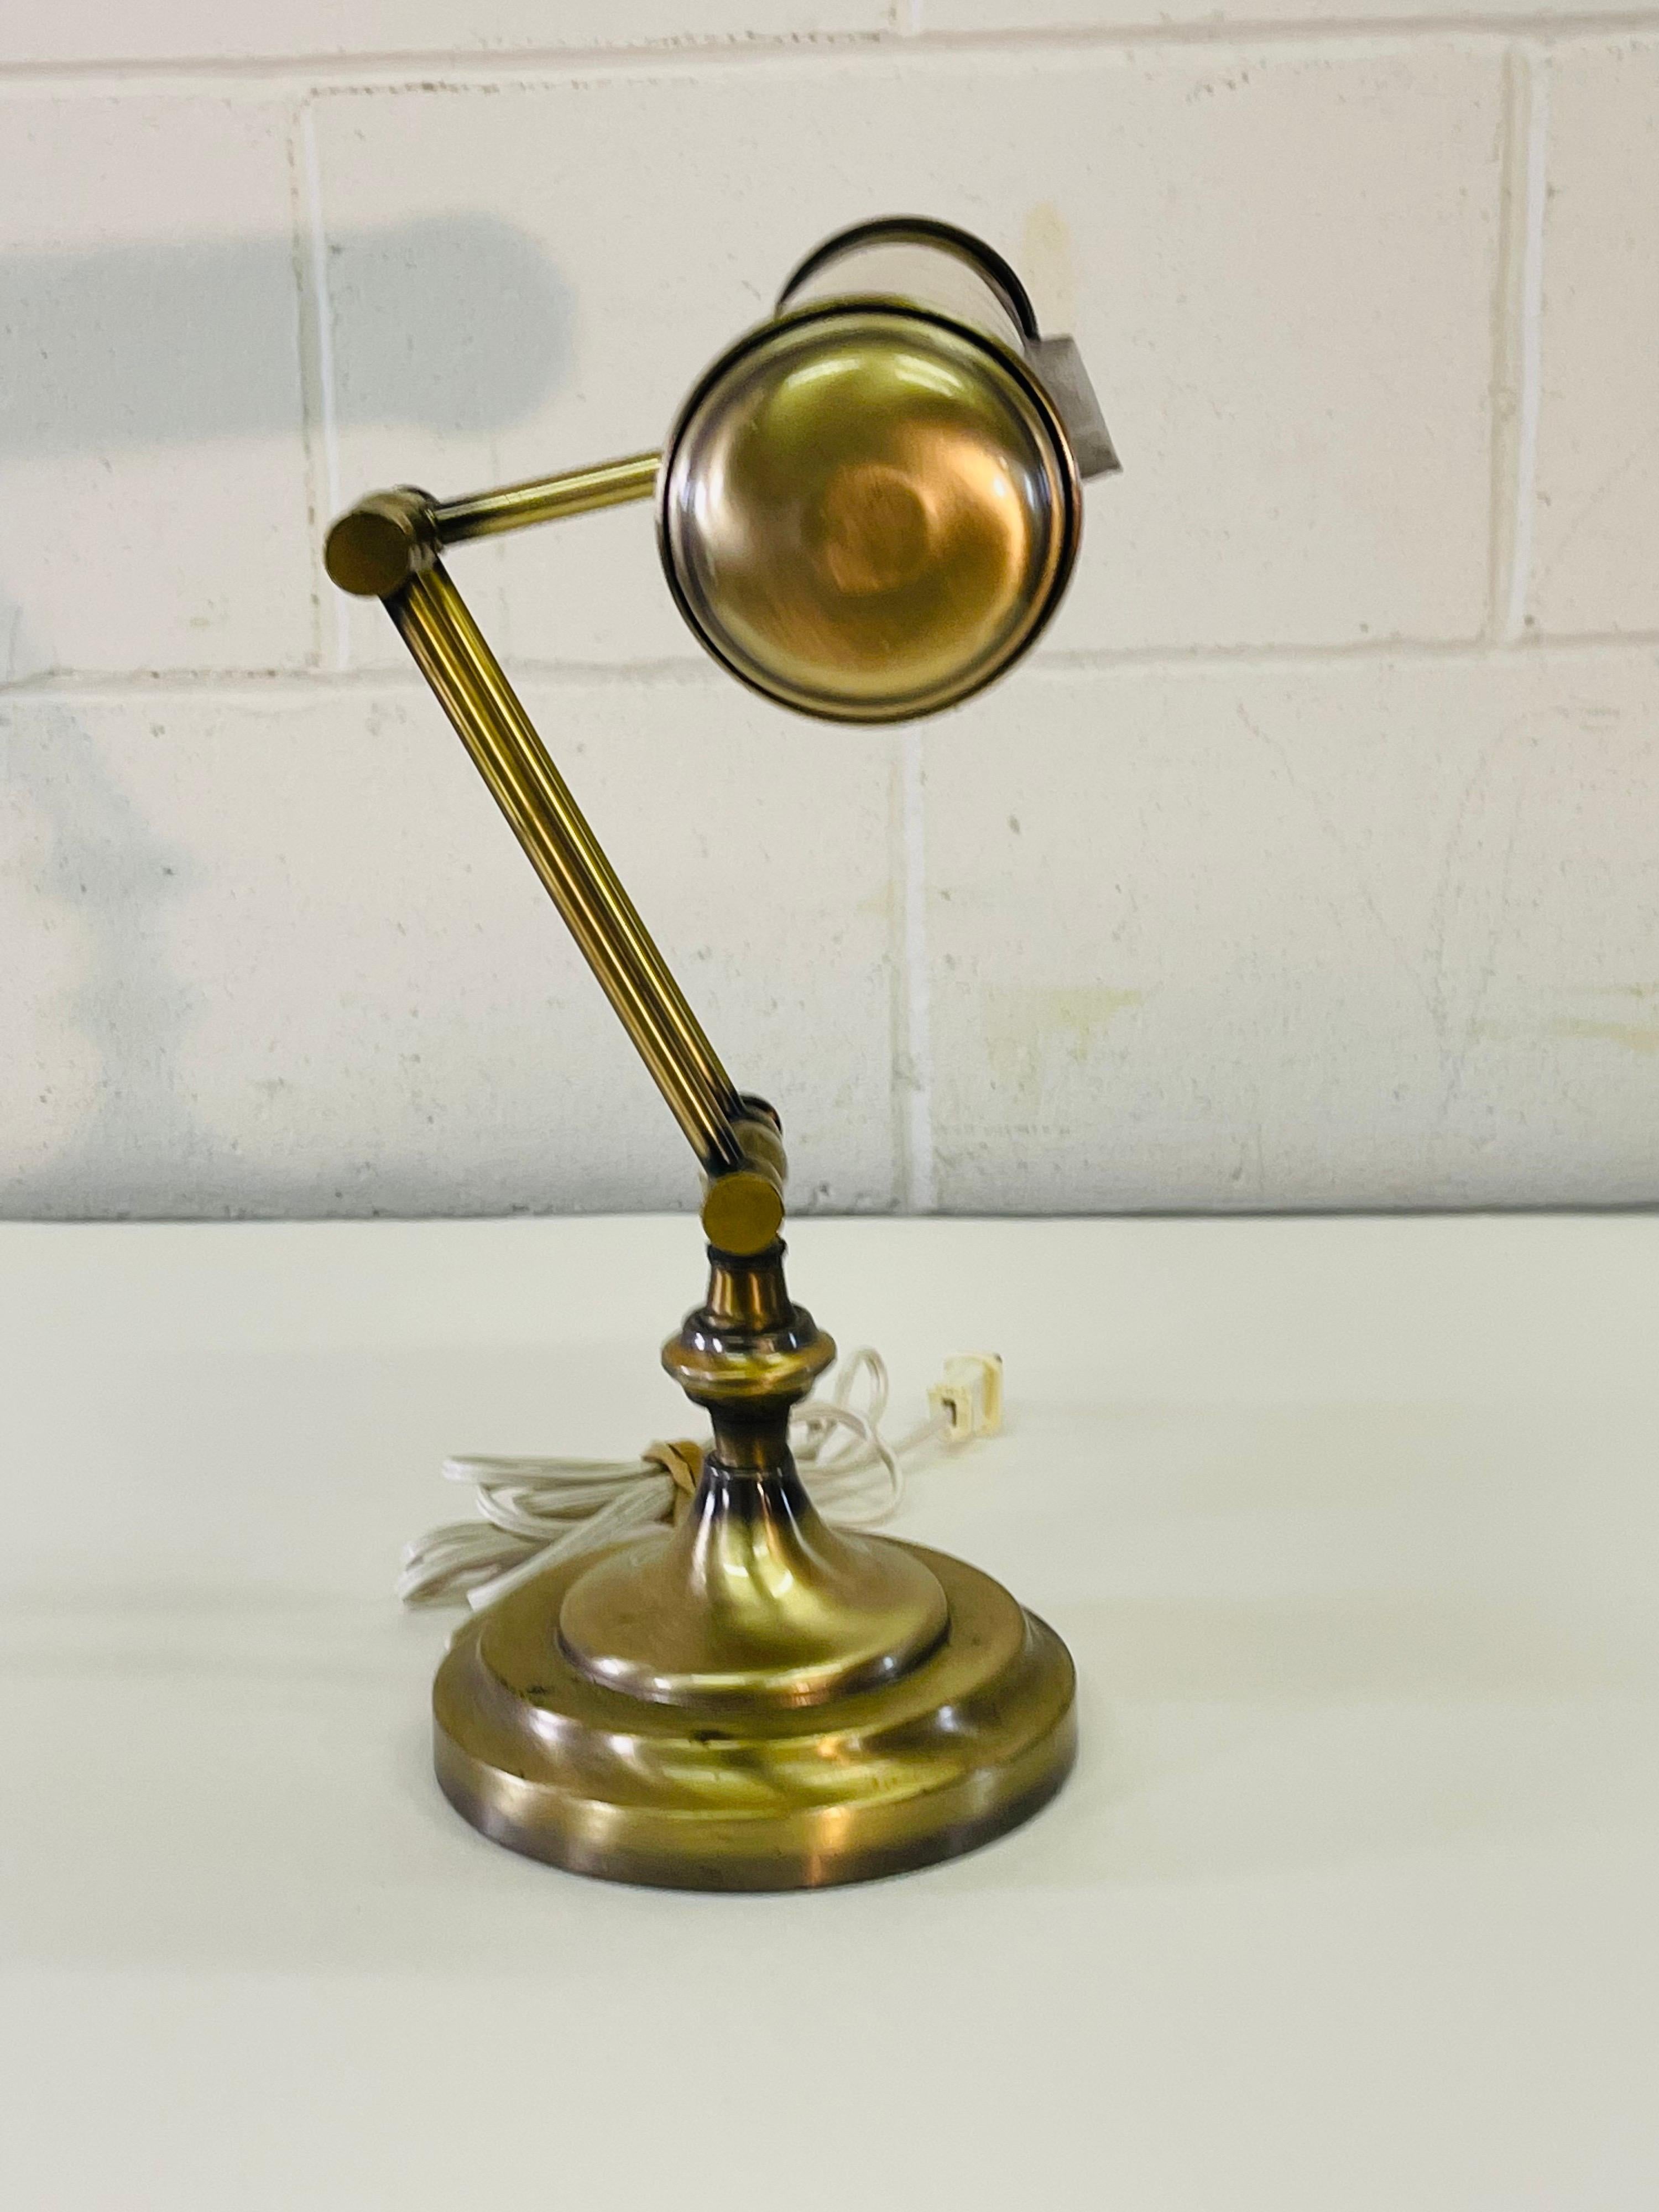 1960s Brushed Brass Desk Lamp In Good Condition For Sale In Amherst, NH